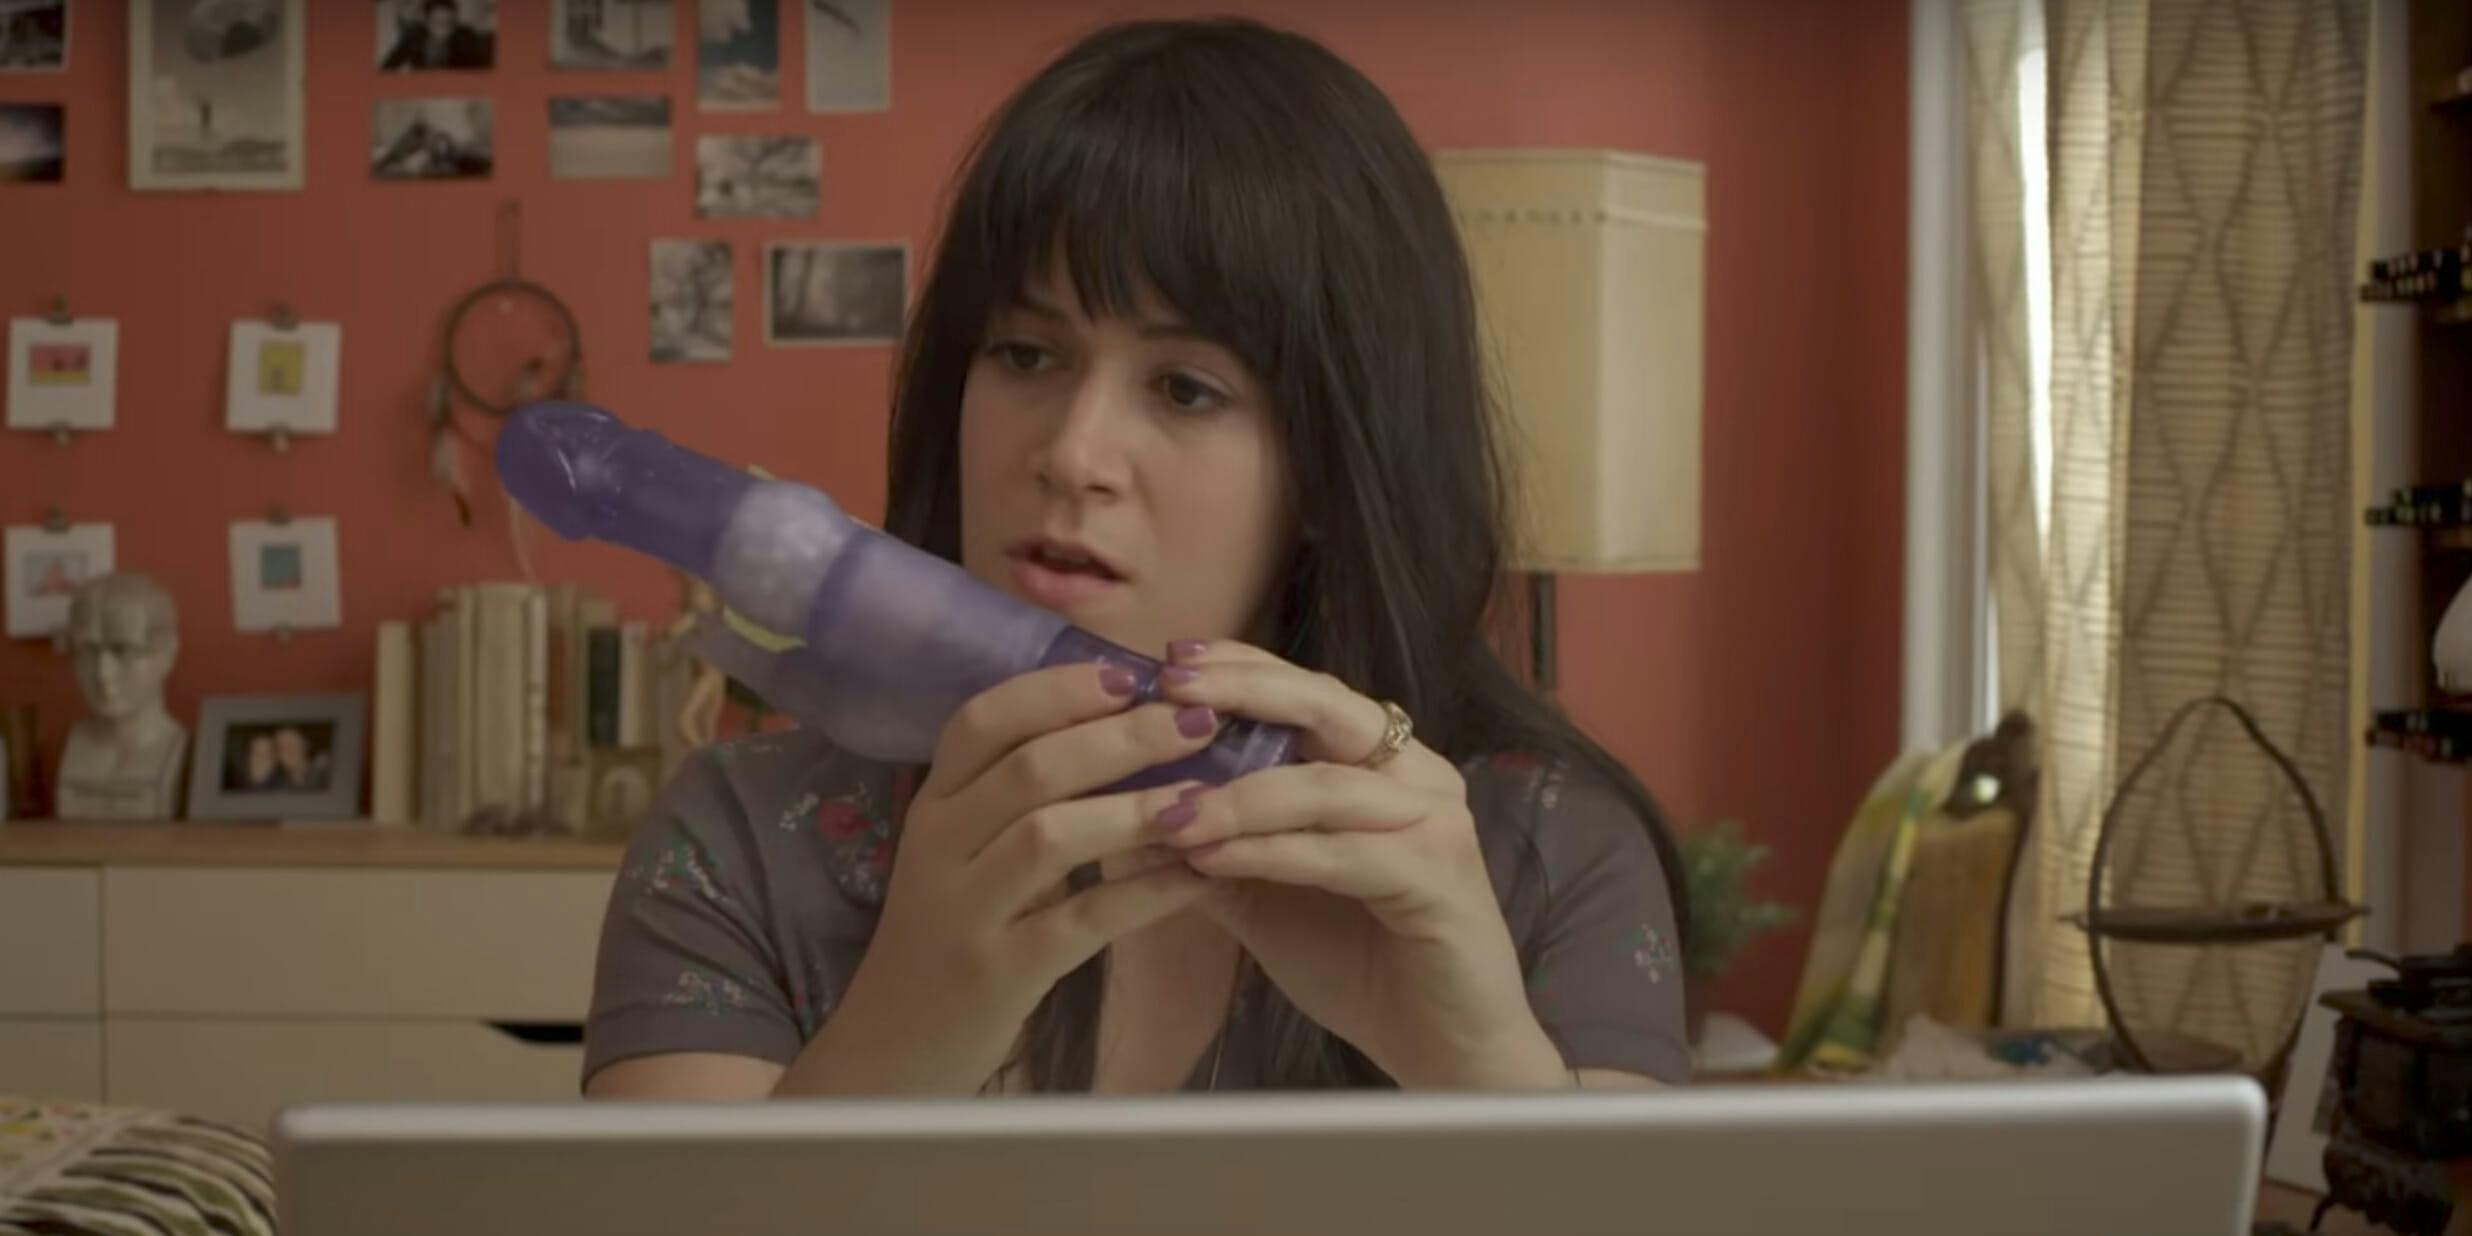 You can now get branded ‘Broad City’ sex toys